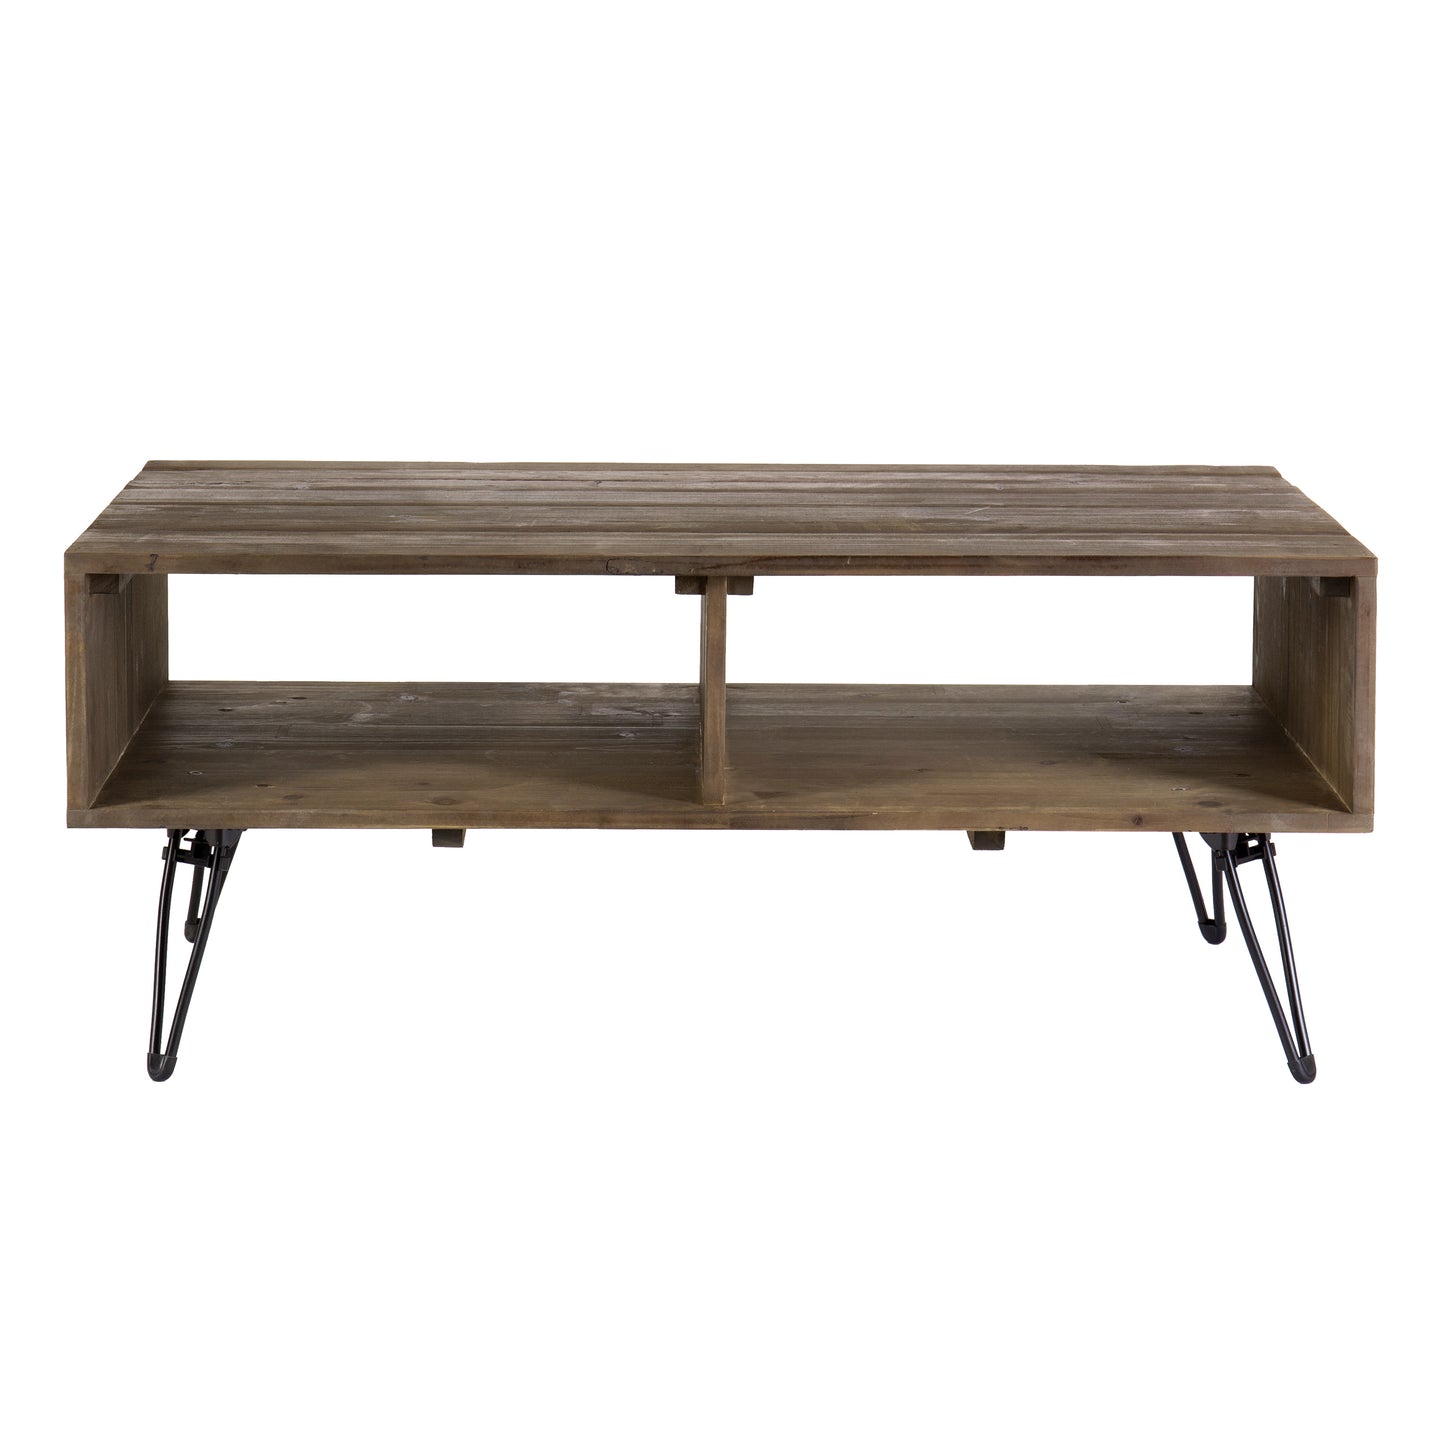 Betsy 42 Inch Reclaimed Wood Rectangle Farmhouse Coffee Table With Storage Iron Legs Natural Brown By The Urban Port UPT-273091